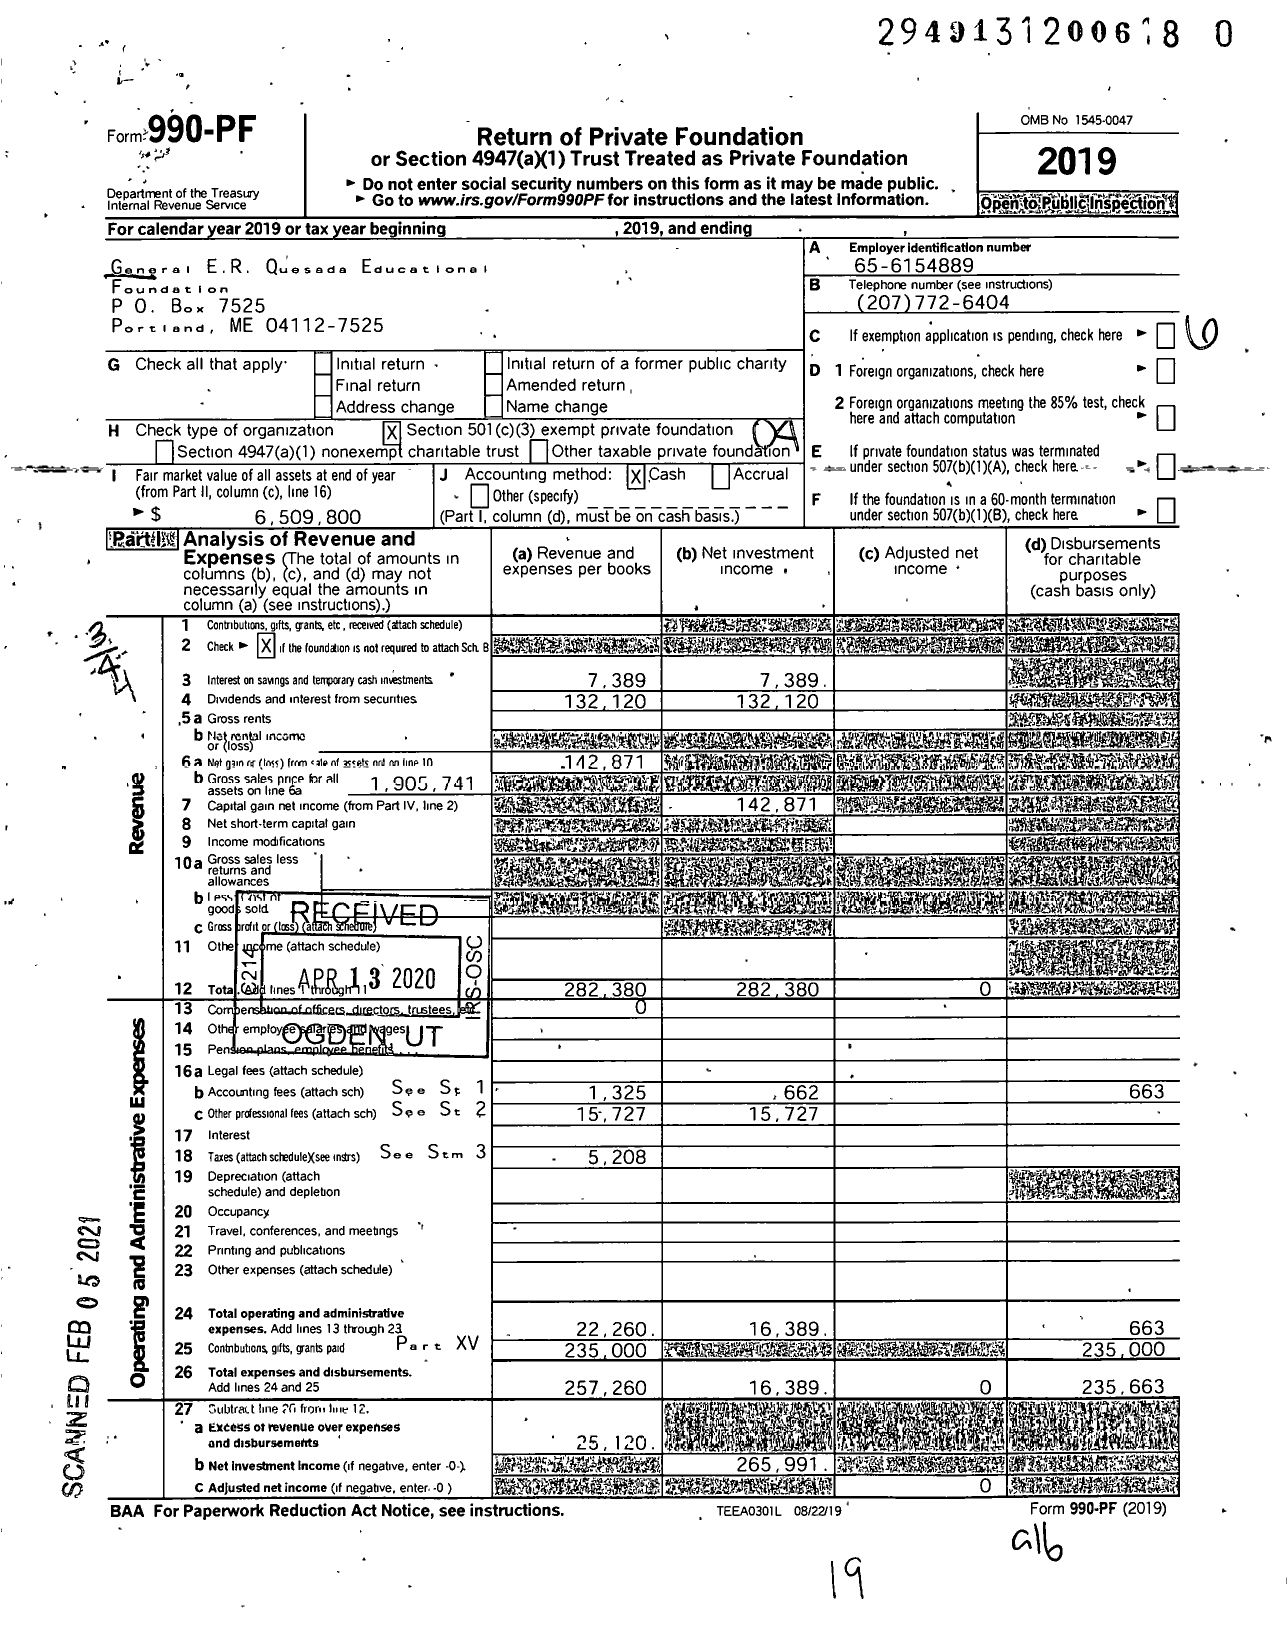 Image of first page of 2019 Form 990PF for General ER R Quesada Educational Foundation